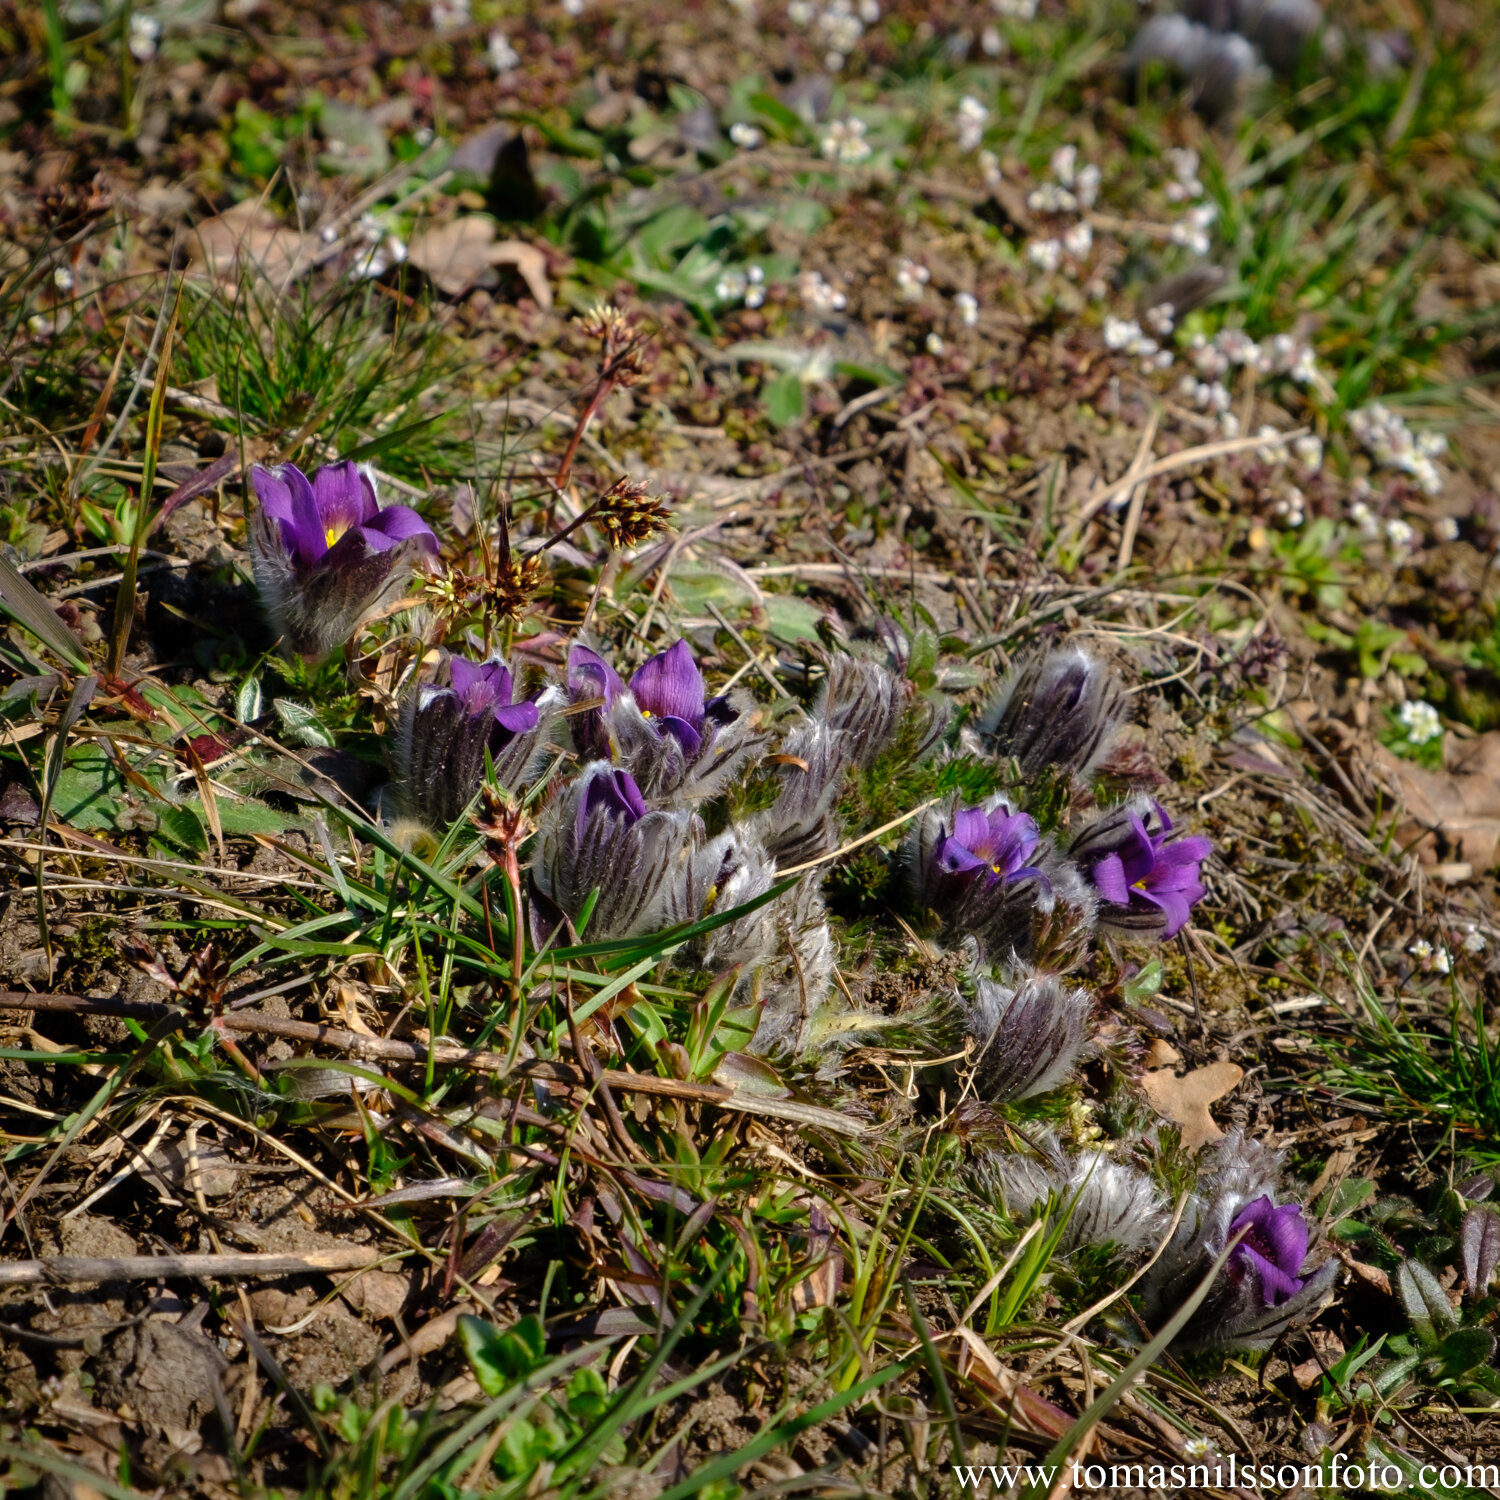 Day 91 - March 31: Little Flowers